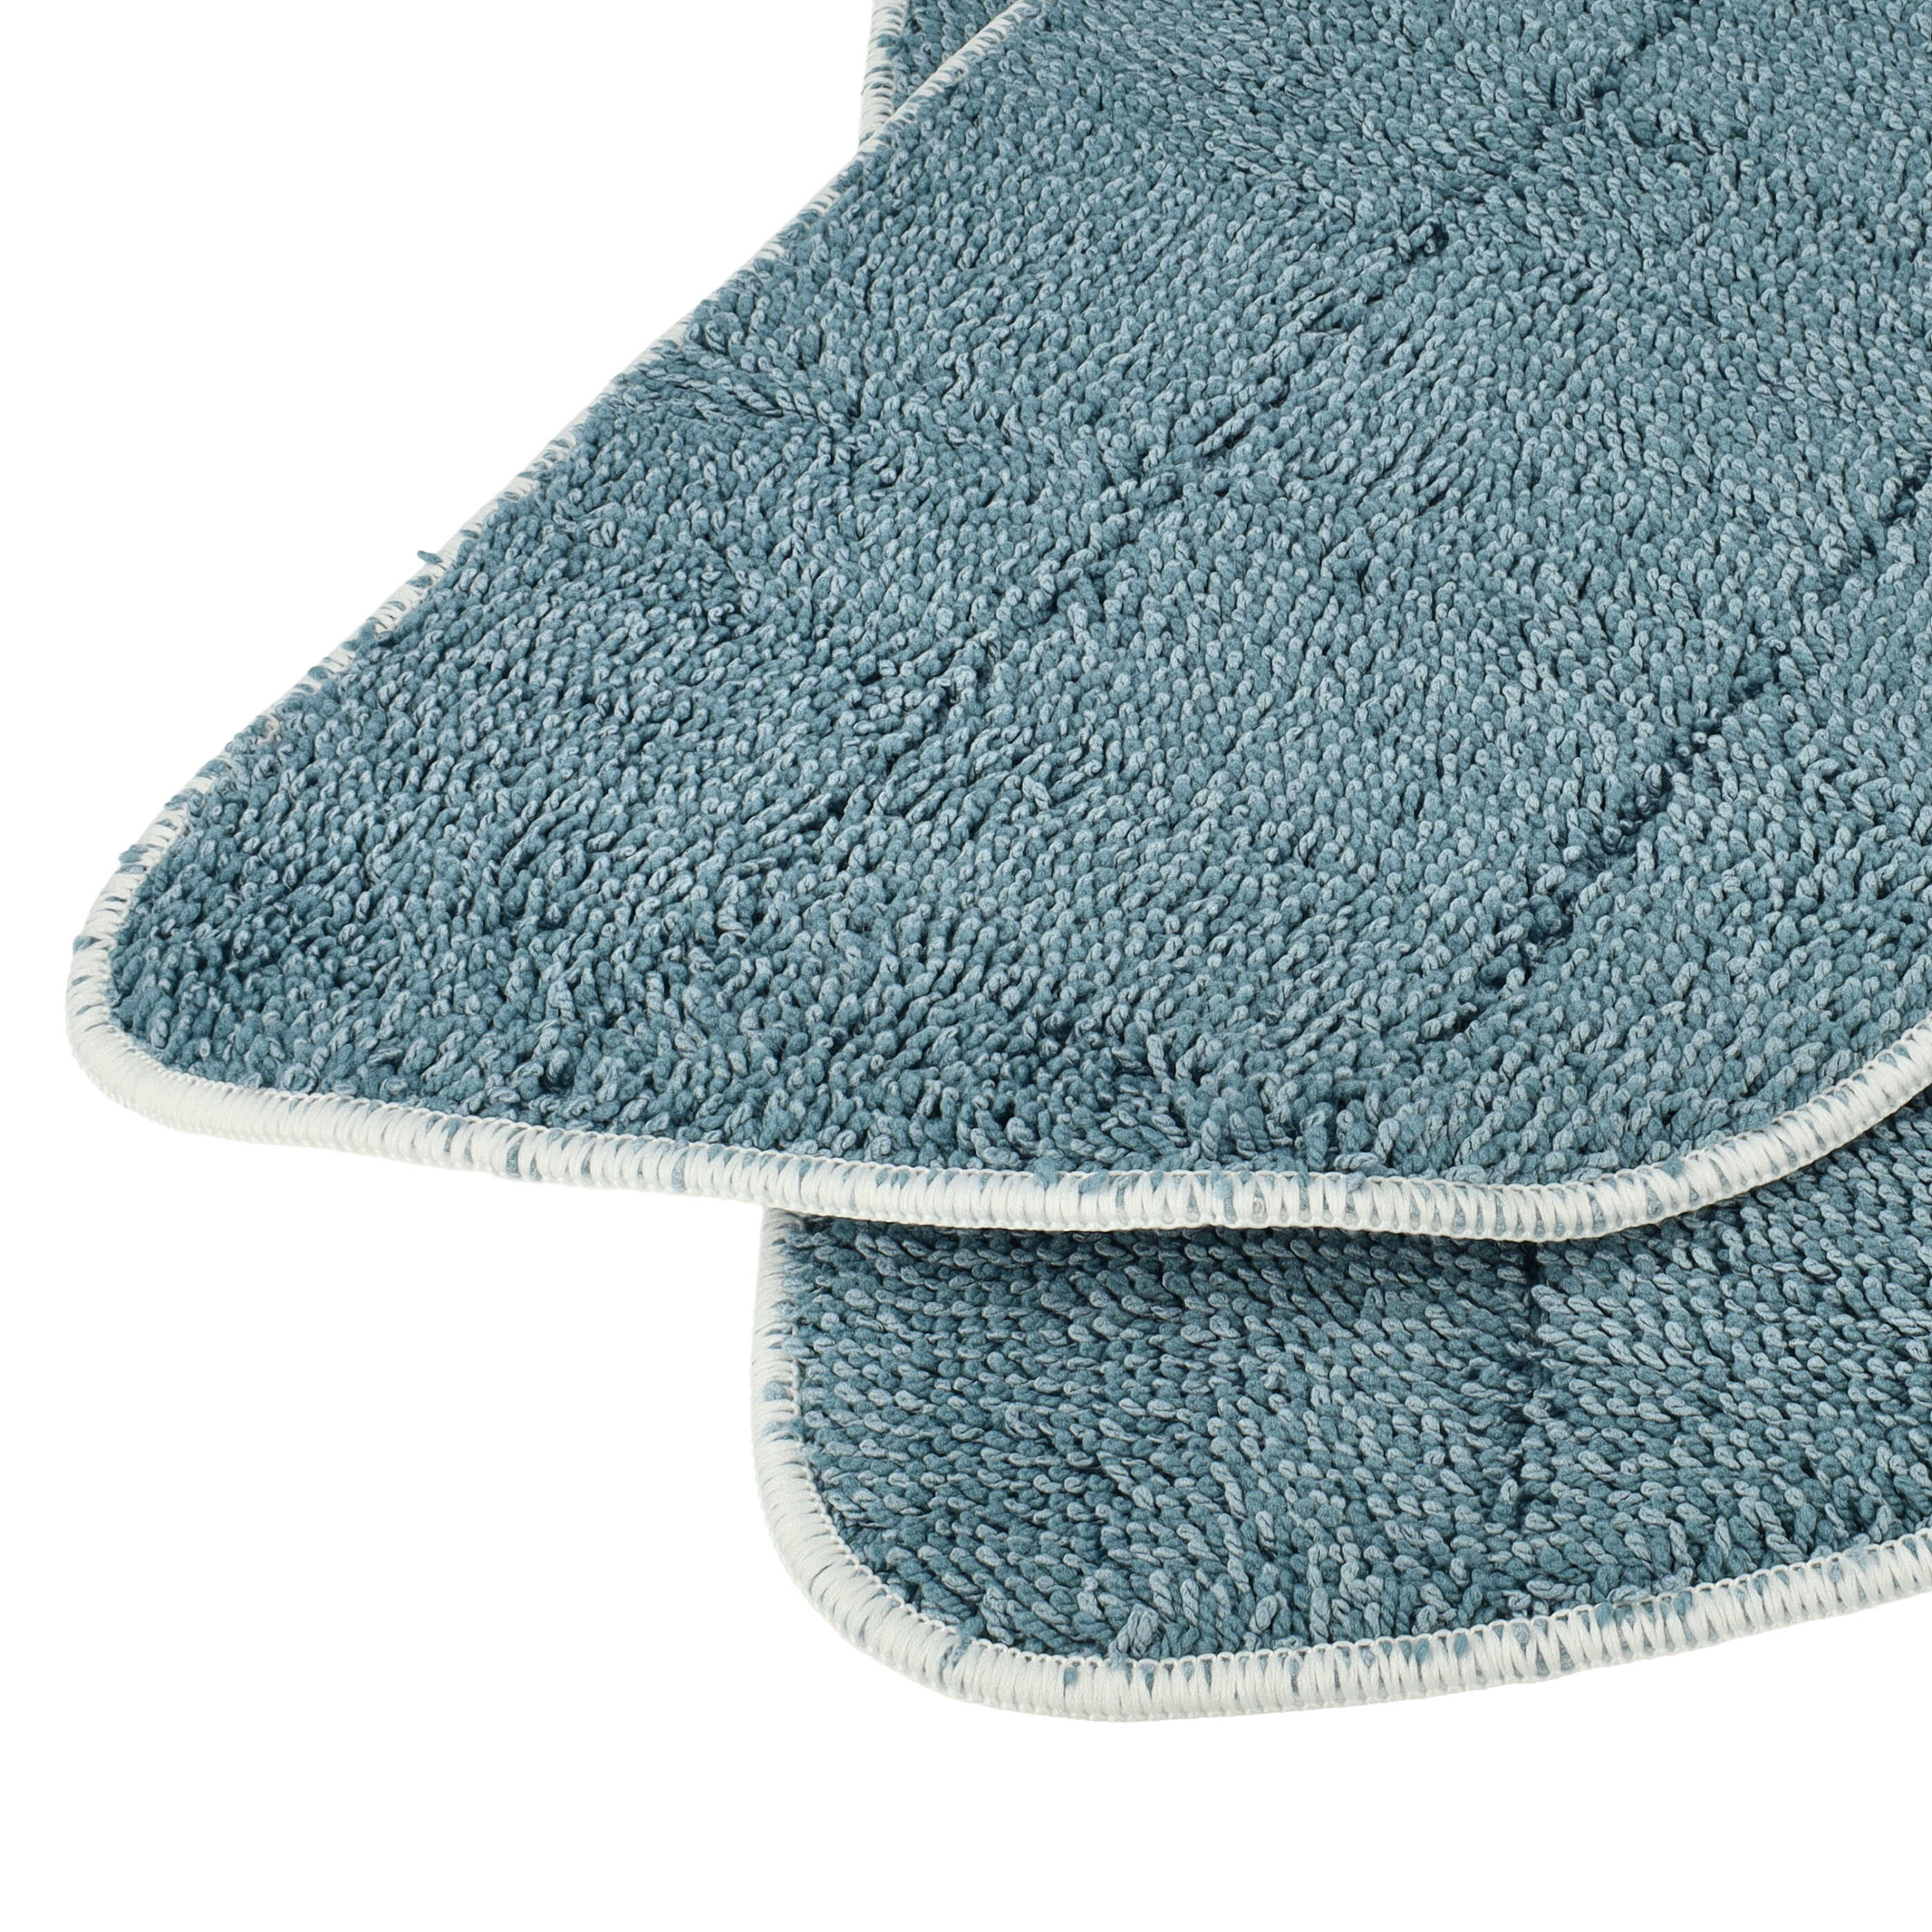 2x Cleaning Pad replaces Leifheit 11941 for LeifheitHot Spray Steamer, Steam Mop - Microfibre grey-blue